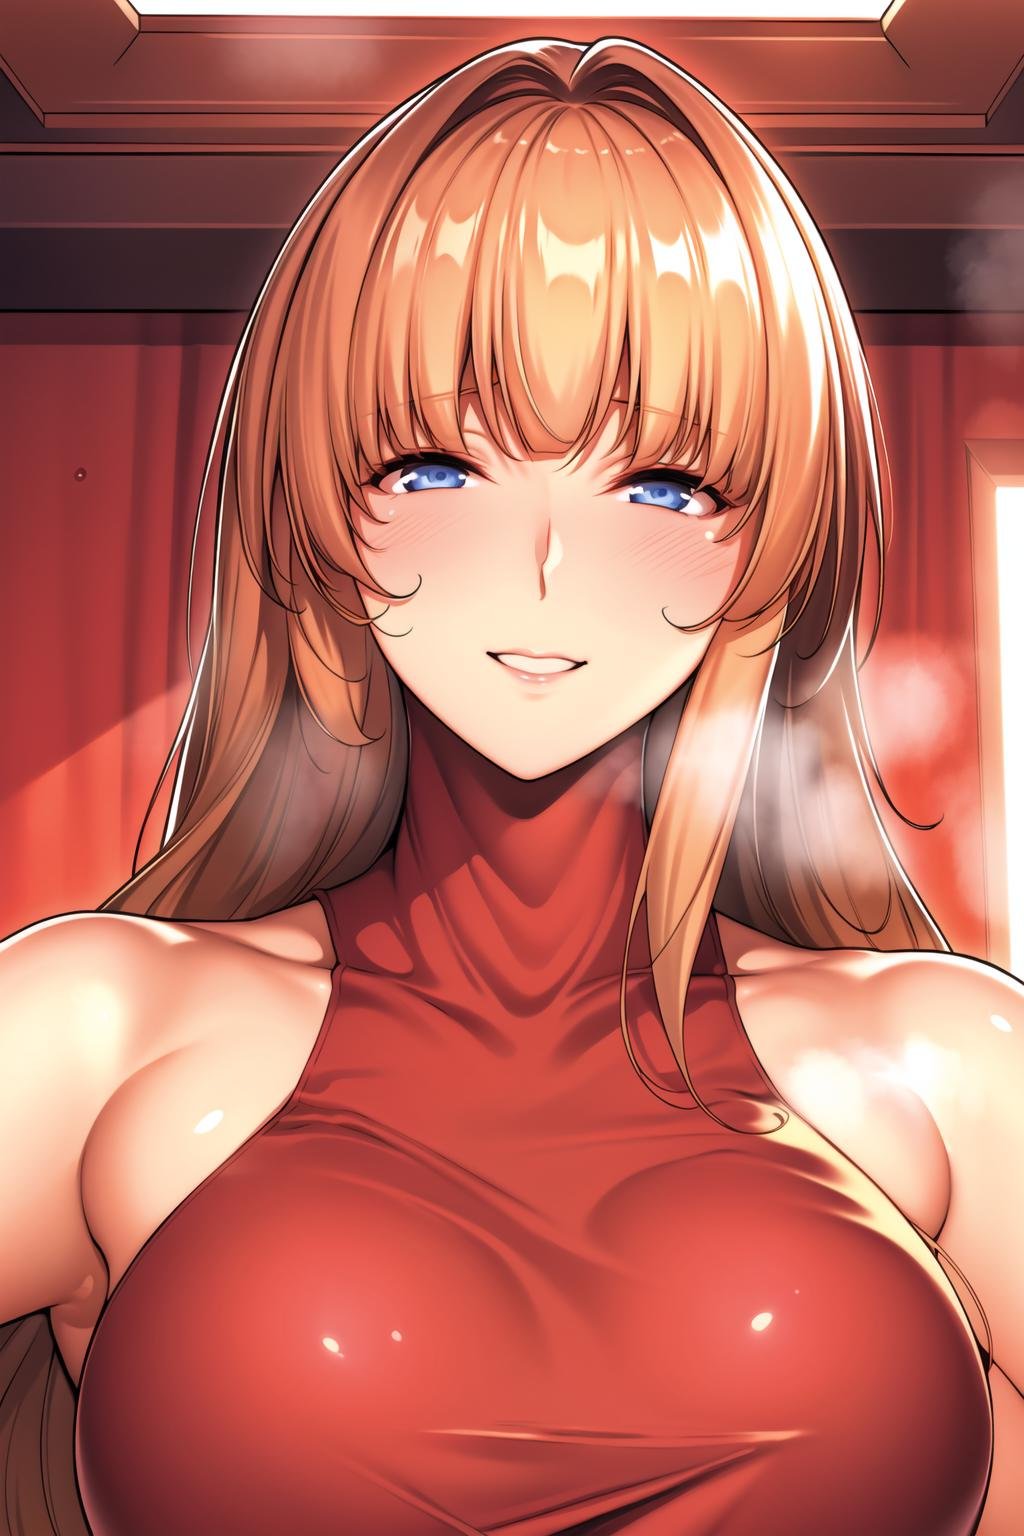 red wall,red shirt,<lora:mira_tsubakihara_masterpiece-KK77-V2:0.7>,blonde hair, blue eyes,long hair,blunt bangs, <lora:Mariana_Luciano_NON_VIRGIN-KK77-V1:0.3>,<lora:more_details:0.1>,1 girl, 20yo,Young female,Beautiful Finger,Beautiful long legs,Beautiful body,Beautiful Nose,Beautiful character design, perfect eyes, perfect face,expressive eyes,perfect balance,looking at viewer,(Focus on her face),closed mouth, (innocent_big_eyes:1.0),Light_Smile,official art,extremely detailed CG unity 8k wallpaper, perfect lighting,Colorful, Bright_Front_face_Lighting,shiny skin, (masterpiece:1.0),(best_quality:1.0), ultra high res,4K,ultra-detailed,photography, 8K, HDR, highres, absurdres:1.2, Kodak portra 400, film grain, blurry background, bokeh:1.2, lens flare, (vibrant_color:1.2),professional photograph, (Beautiful,large_Breasts:1.4), (beautiful_face:1.5),(narrow_waist), 